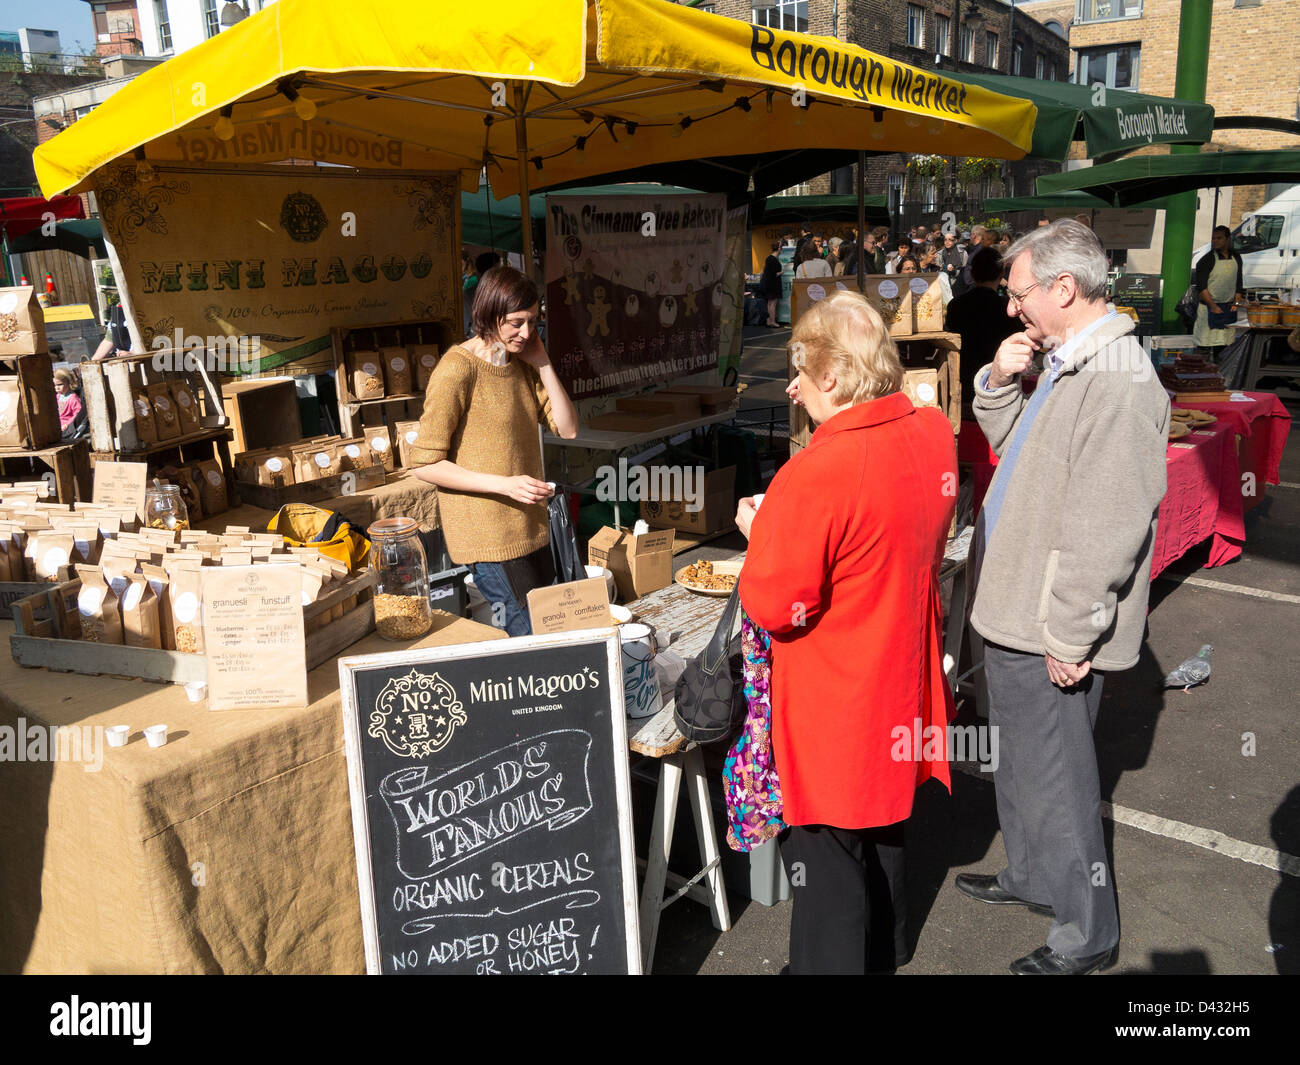 Stall selling organic cereals in Borough Market, London Stock Photo